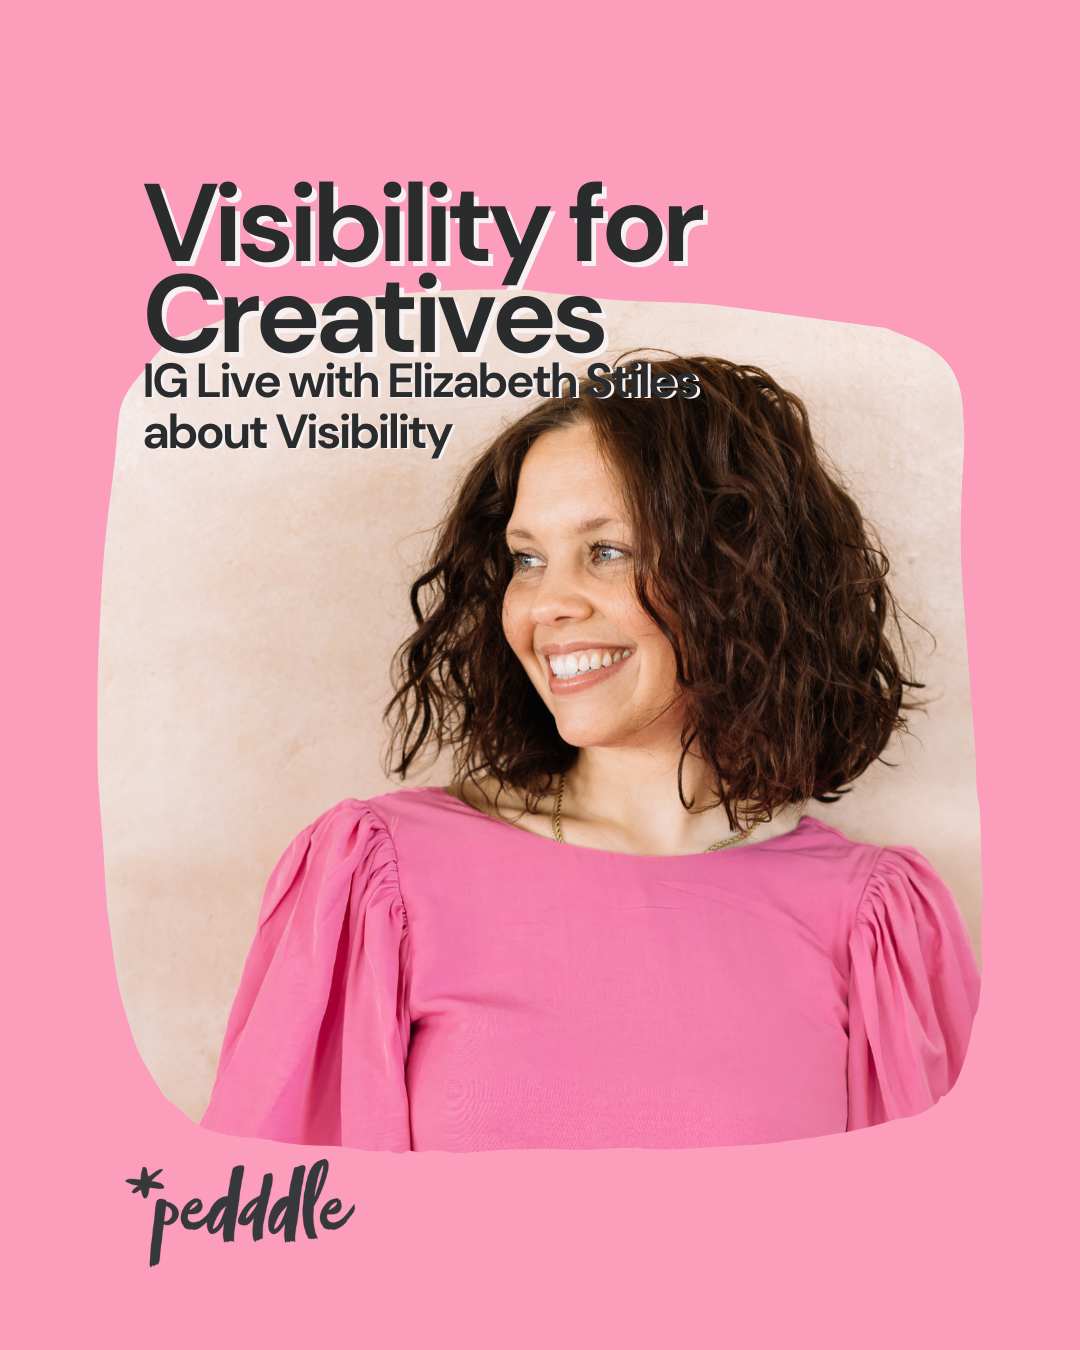 Pink graphic with text: Visbility for Creatives with Elizabeth Stiles